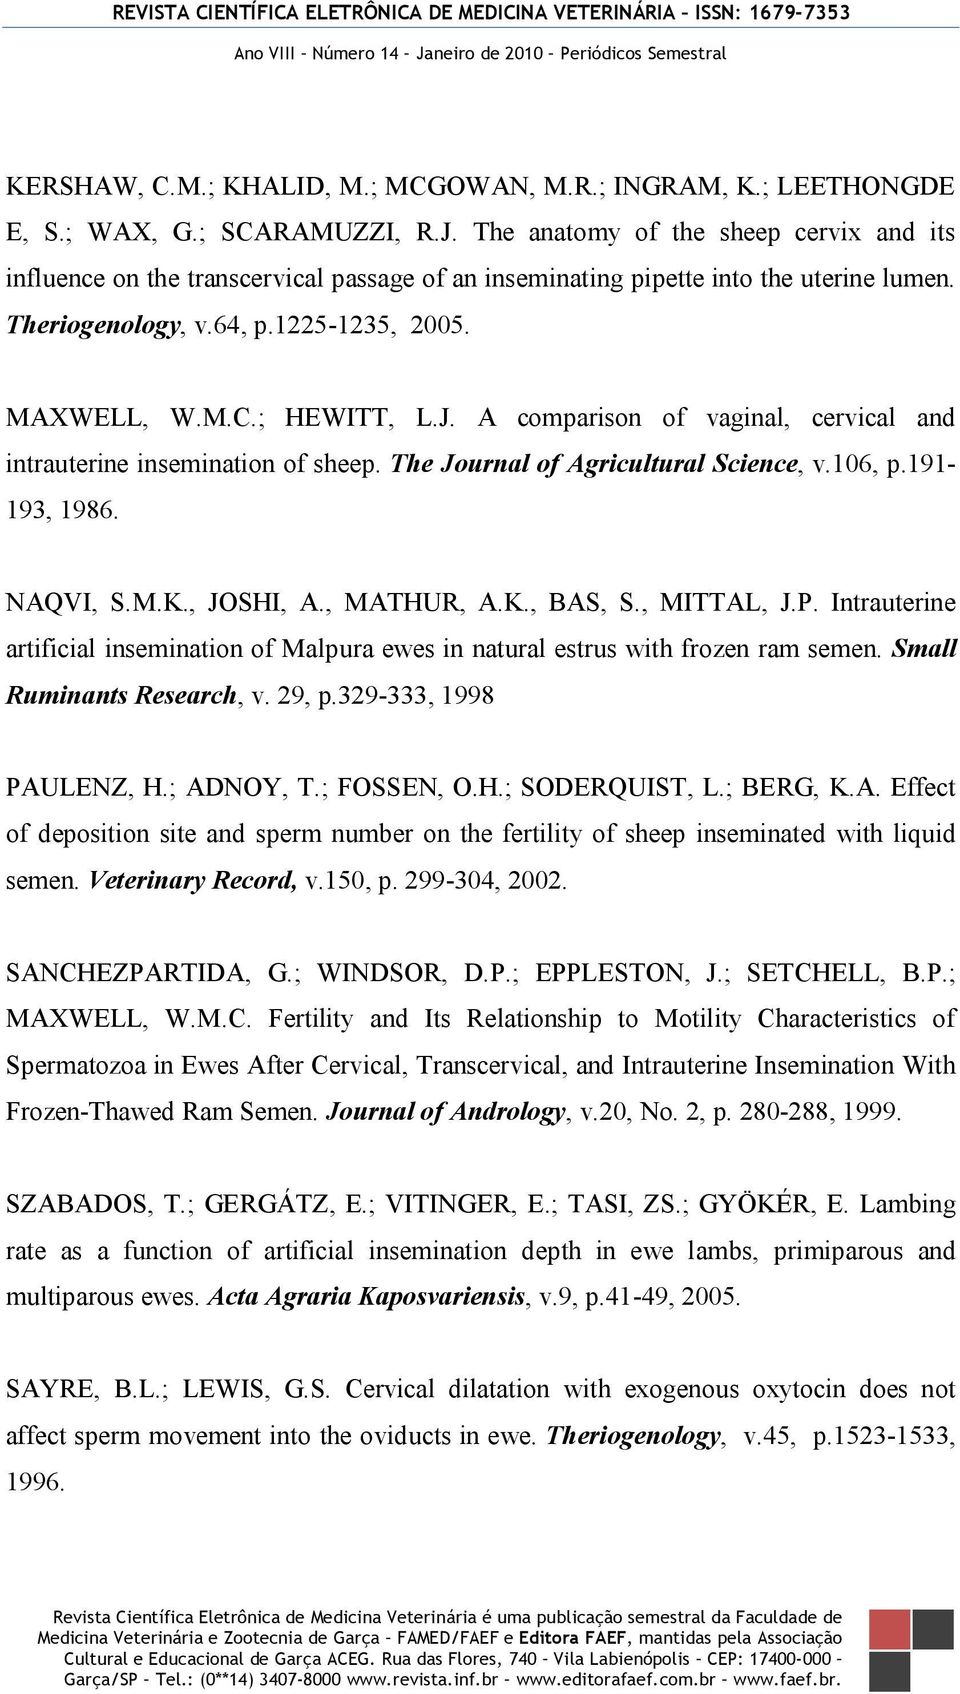 A comparison of vaginal, cervical and intrauterine insemination of sheep. The Journal of Agricultural Science, v.106, p.191-193, 1986. NAQVI, S.M.K., JOSHI, A., MATHUR, A.K., BAS, S., MITTAL, J.P.